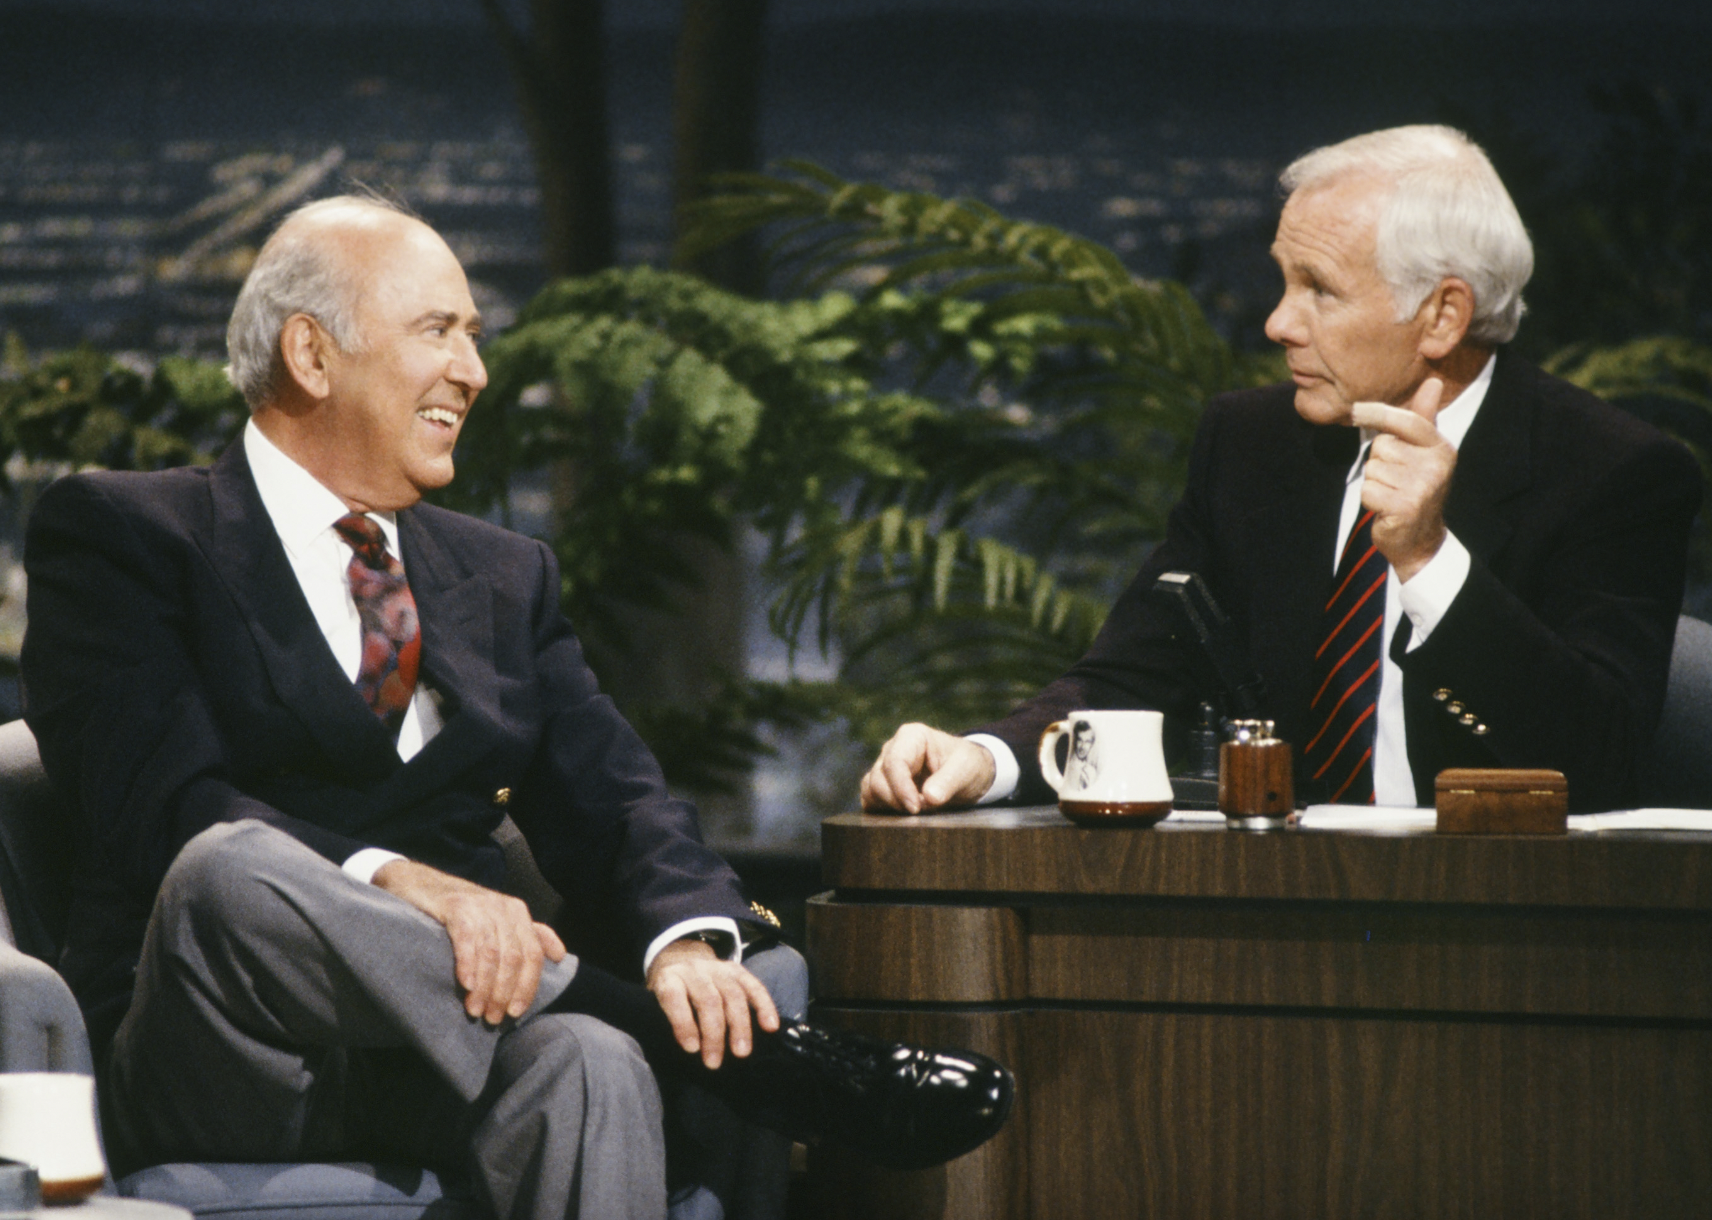 Johnny Carson and Carl Reiner in "The Tonight Show Starring Johnny Carson"